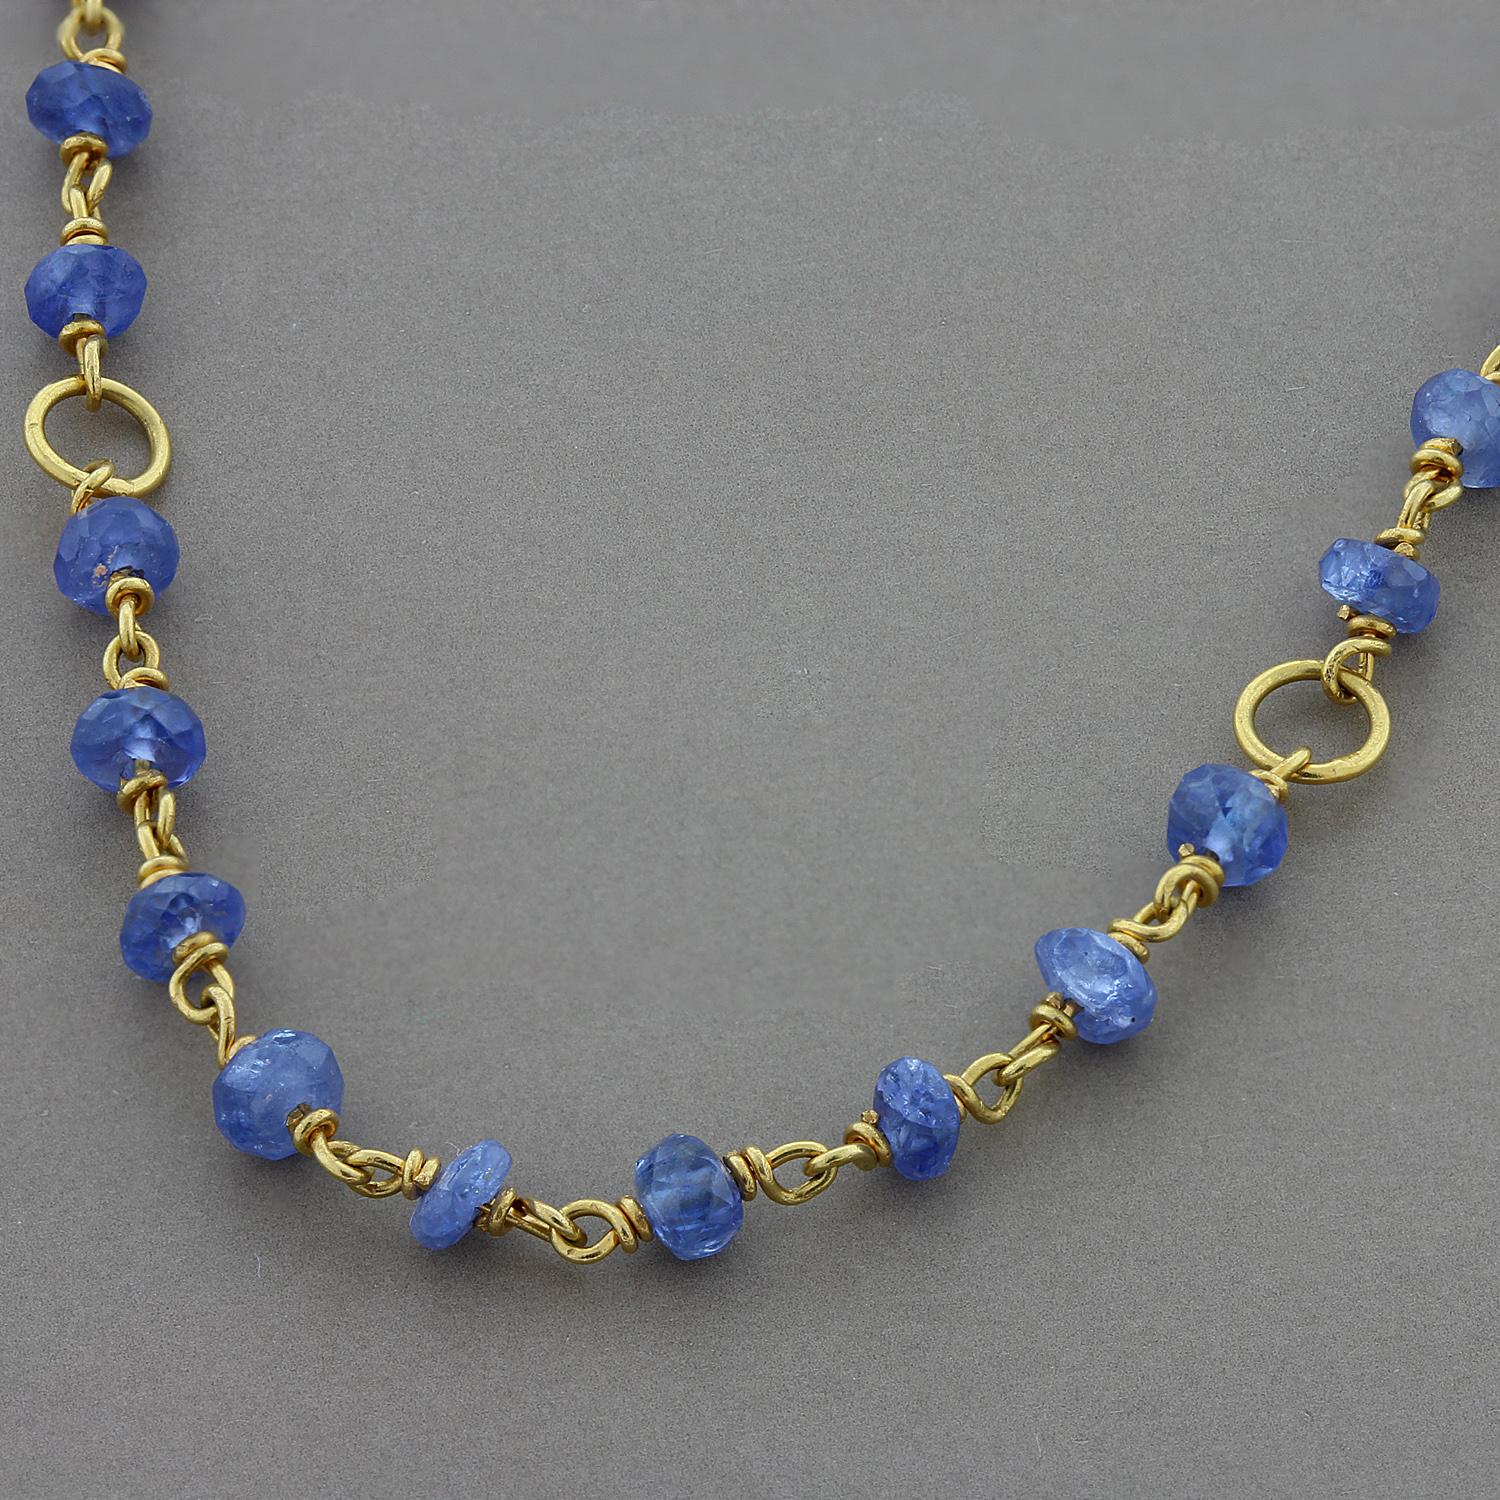 A delicate and sweet everyday necklace featuring blue sapphire beads with six gold halos. Set in 14K yellow gold.

Necklace Length: 15.5 inches
